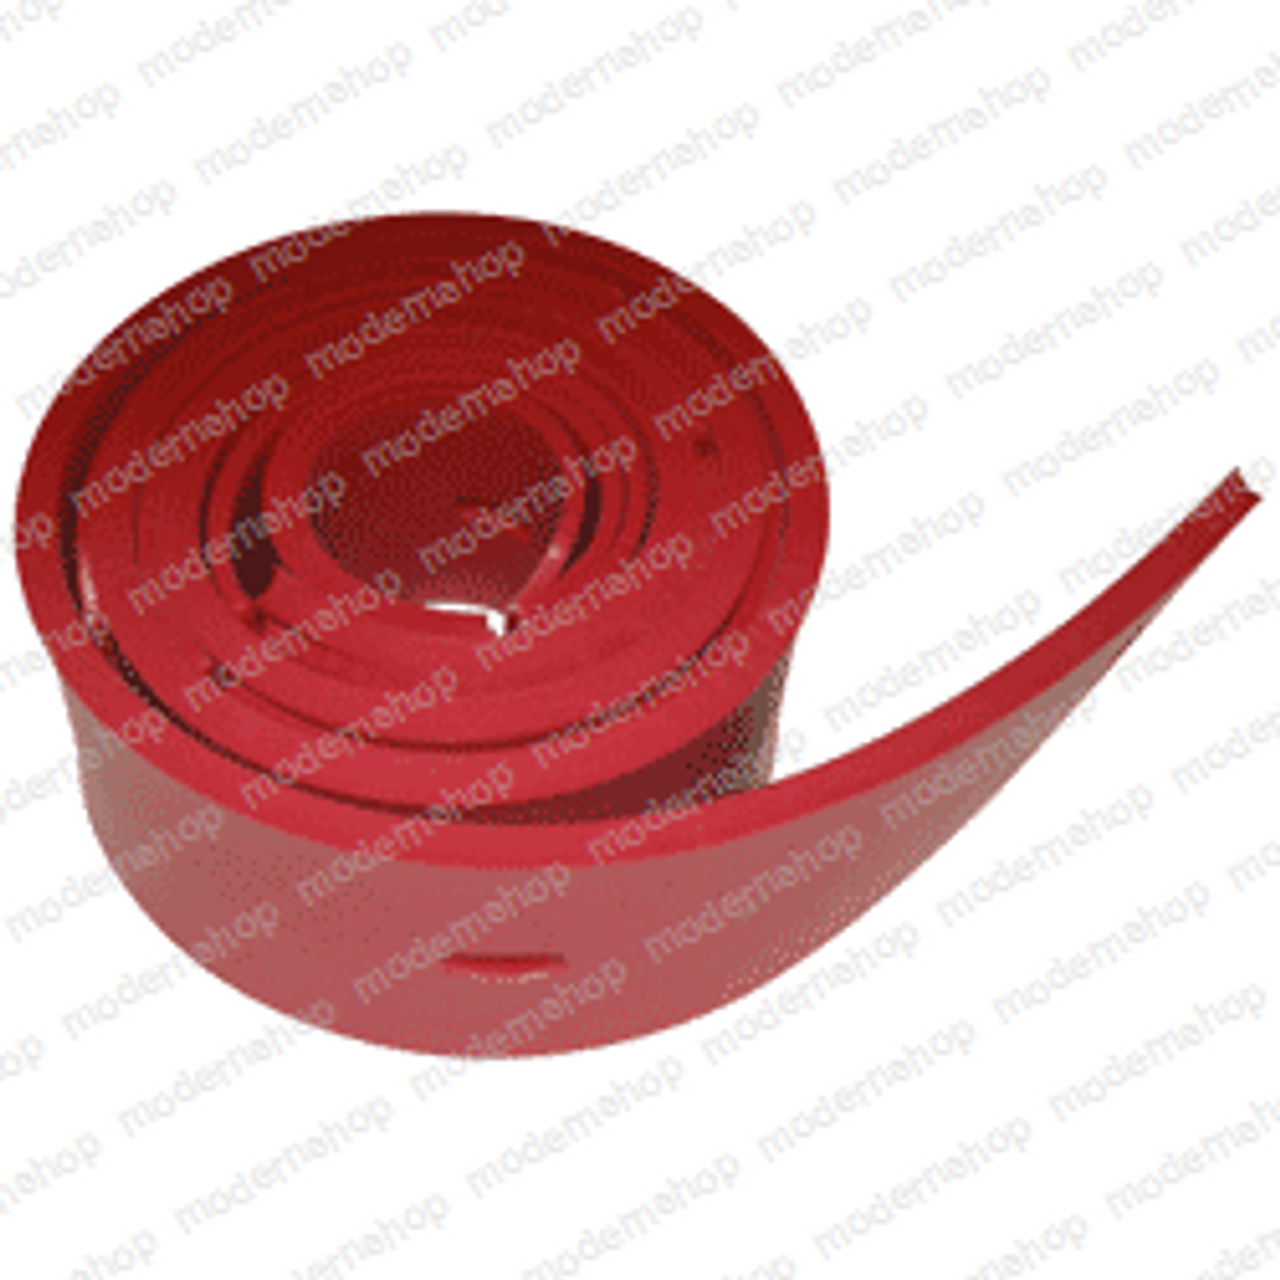 56413757: Clarke Sweepers SQUEEGEE SET - RED GUM